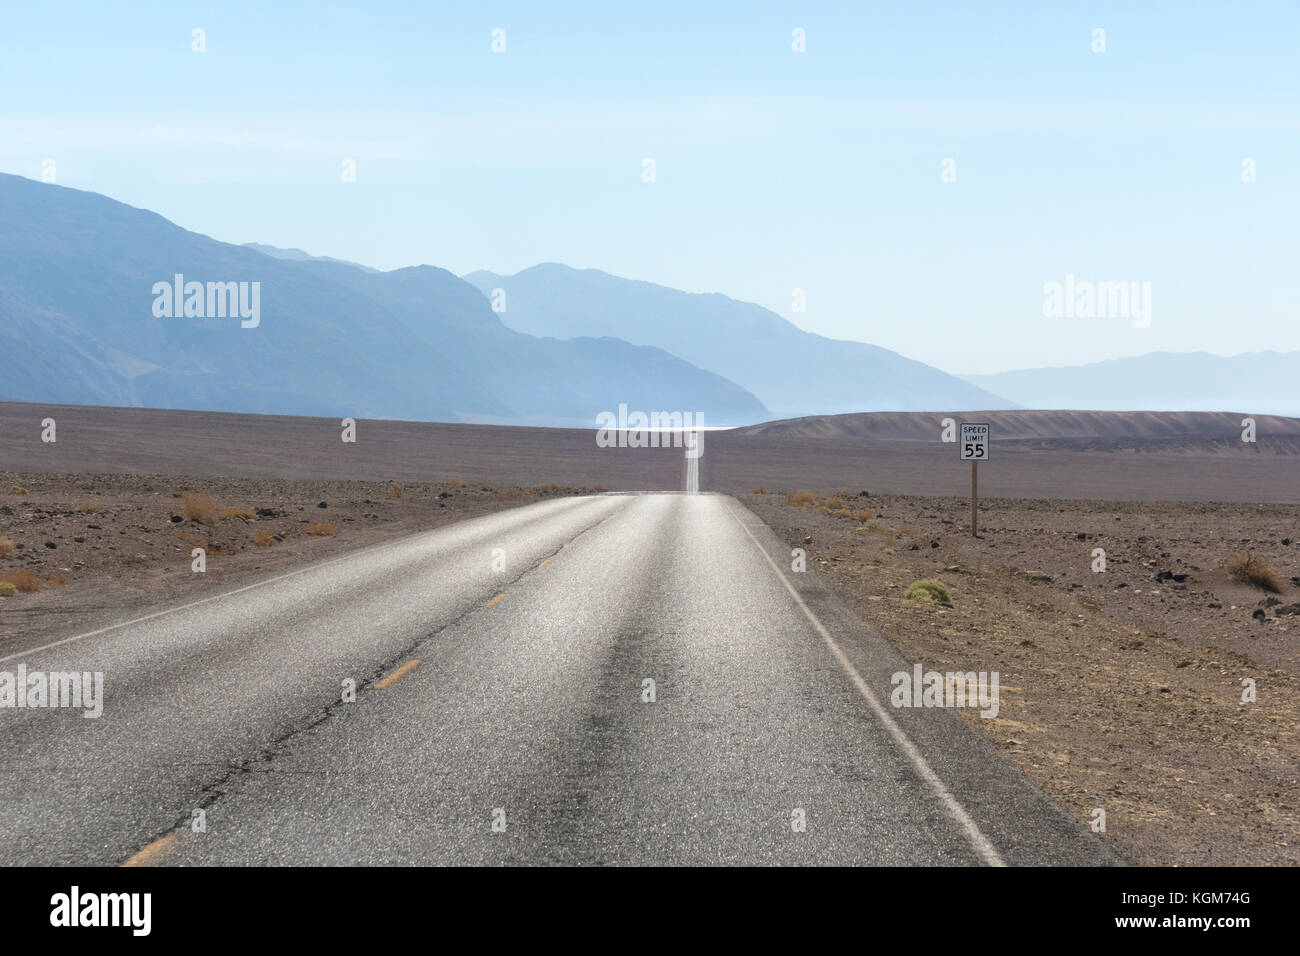 Empty desert road. Death Valley Badwater Road with Badwater Basin shimmering in the distance. Stock Photo